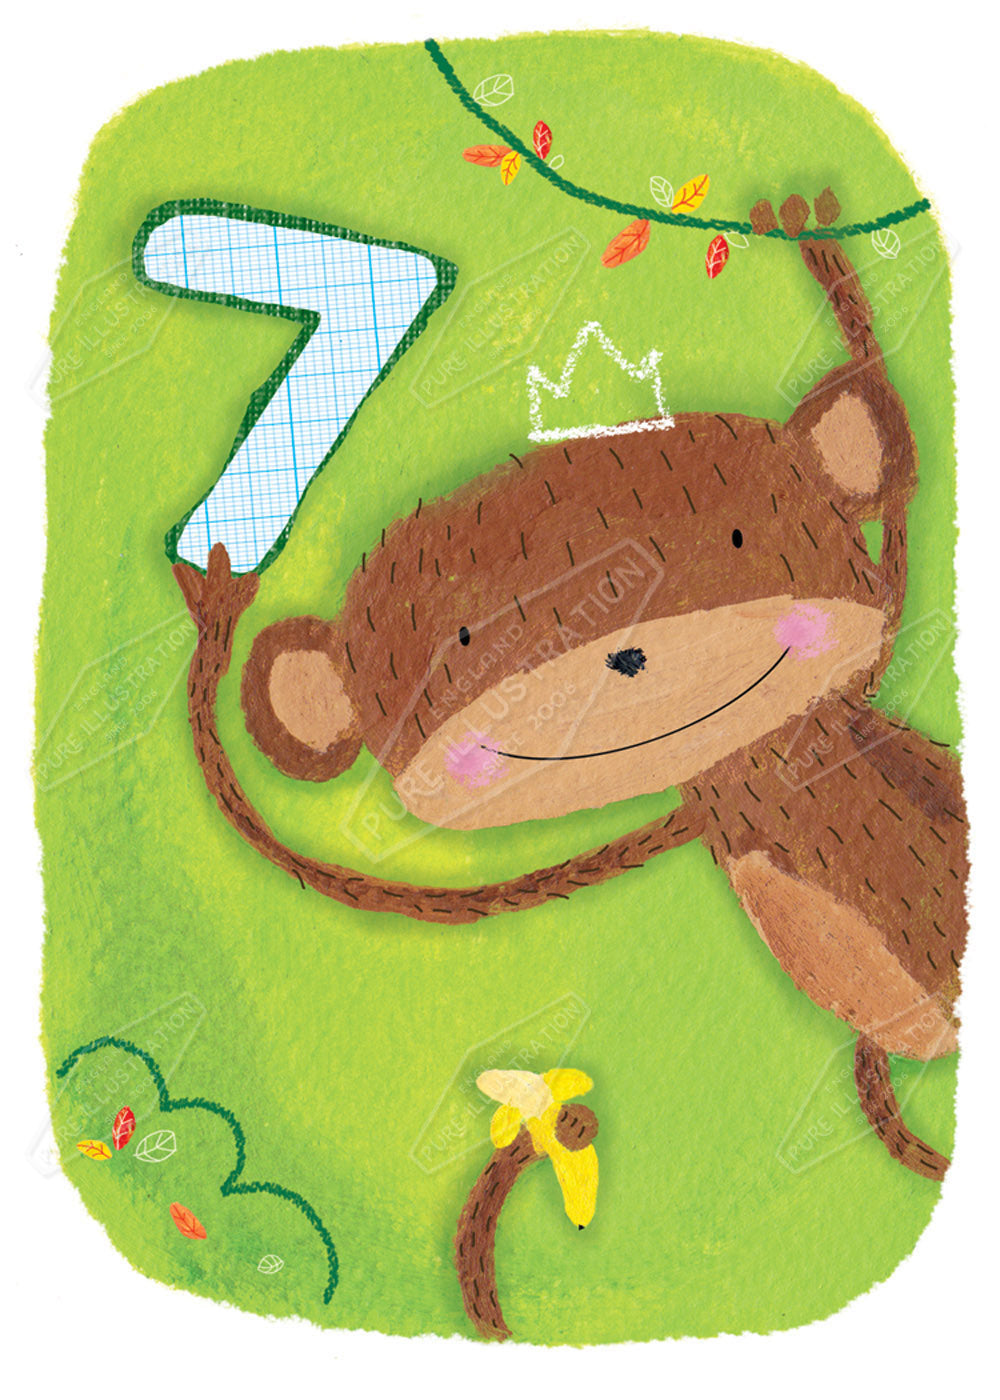 Birthday Monkey Age Card Greeting Card Design by Cory Reid for Pure art Licensing Agency & Surface Design Studio